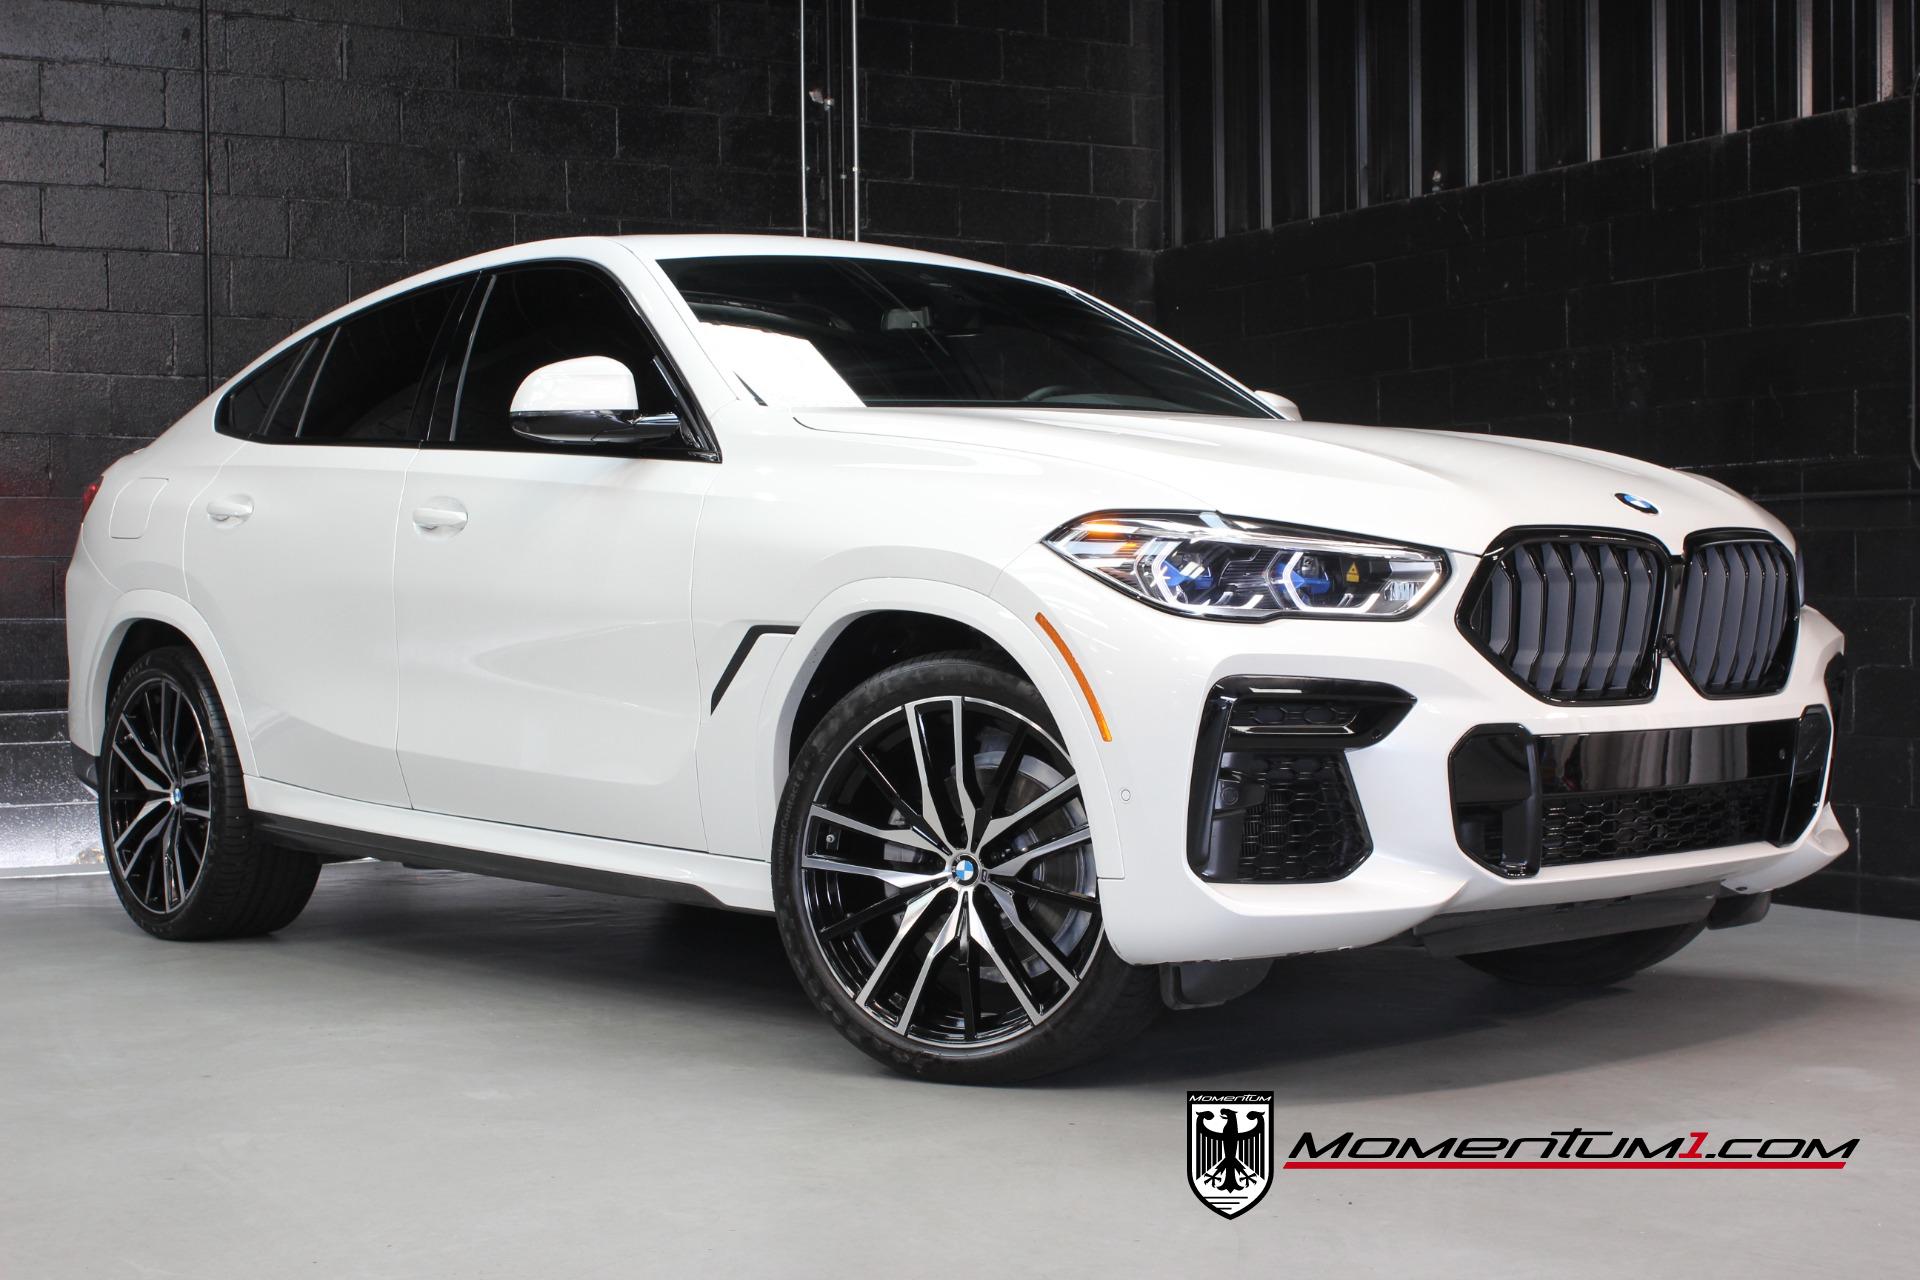 BMW X6 50 Jahre M Edition SUV: price, design, features, and performance